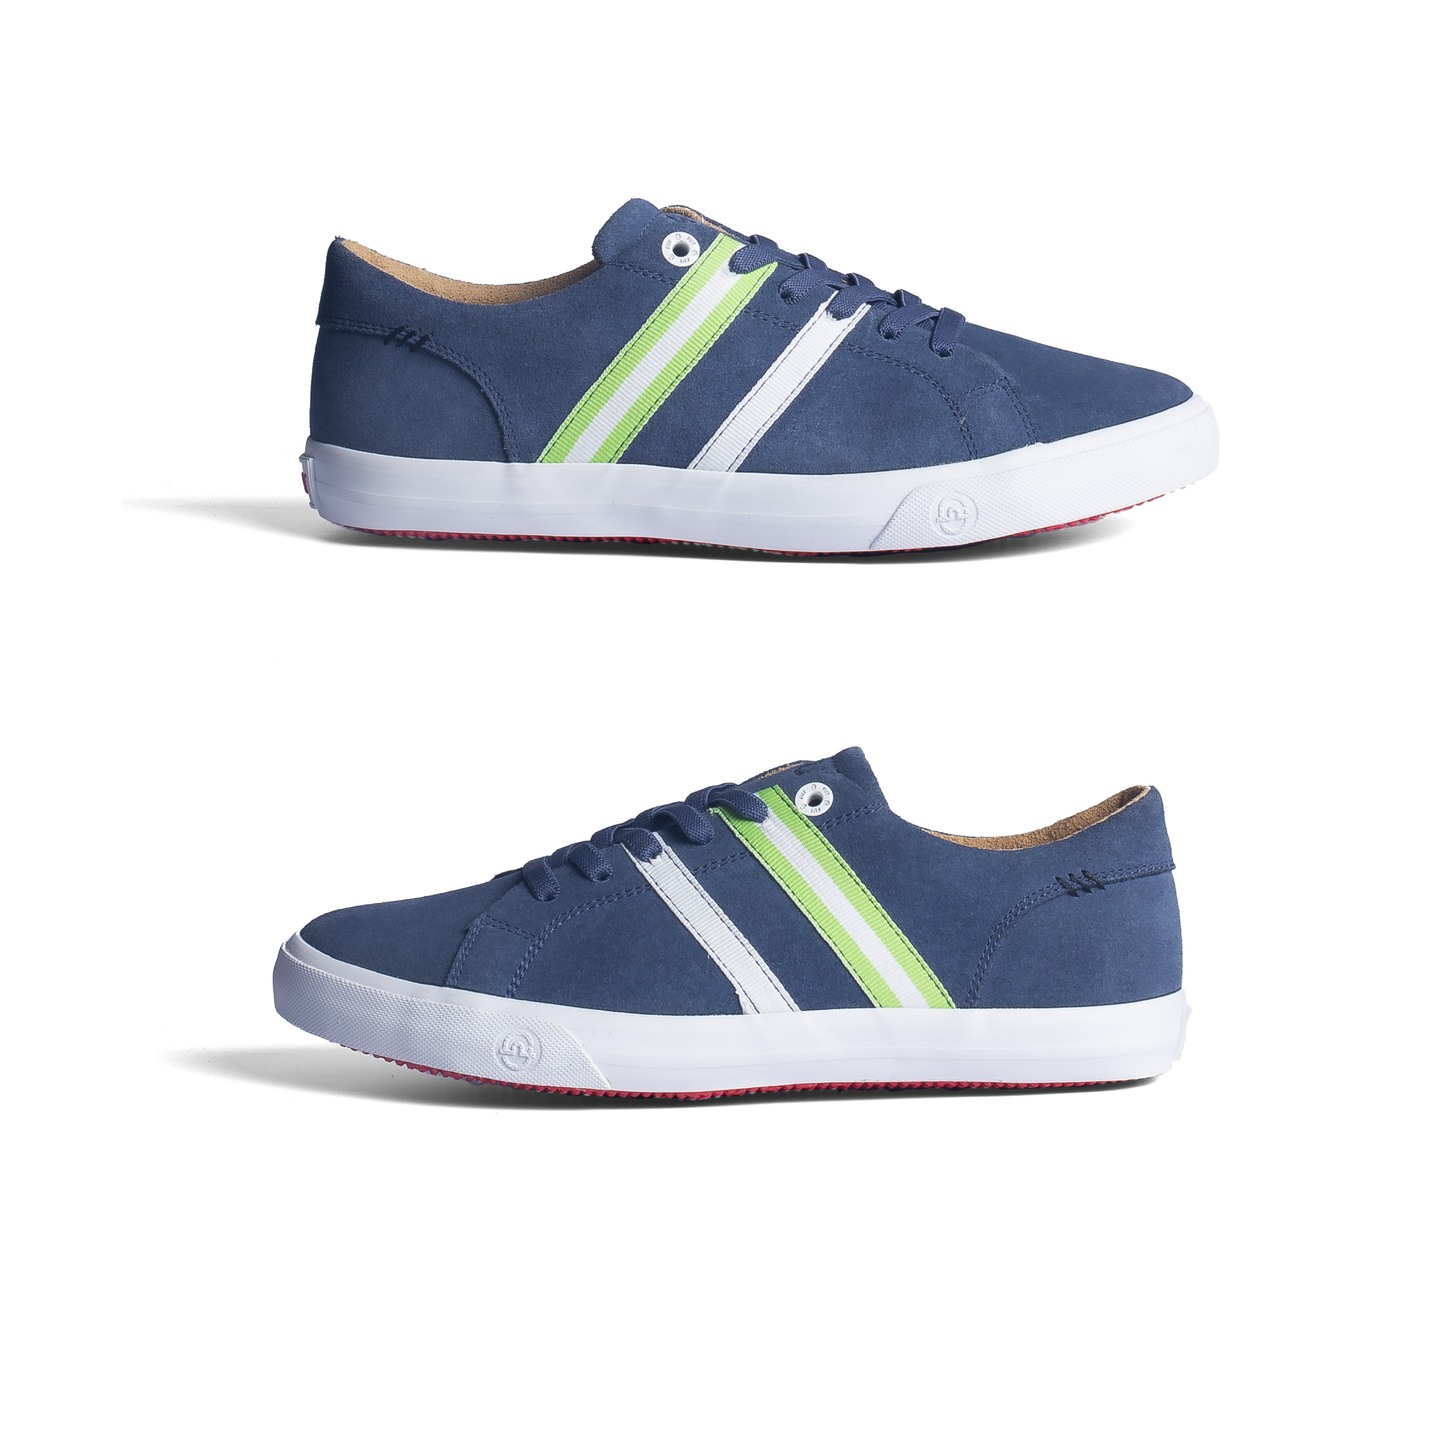 Walking in Comfort Wide Fit Leather Footwear by FUT in City Collection Bogota Navy Green Grey Strips Side View